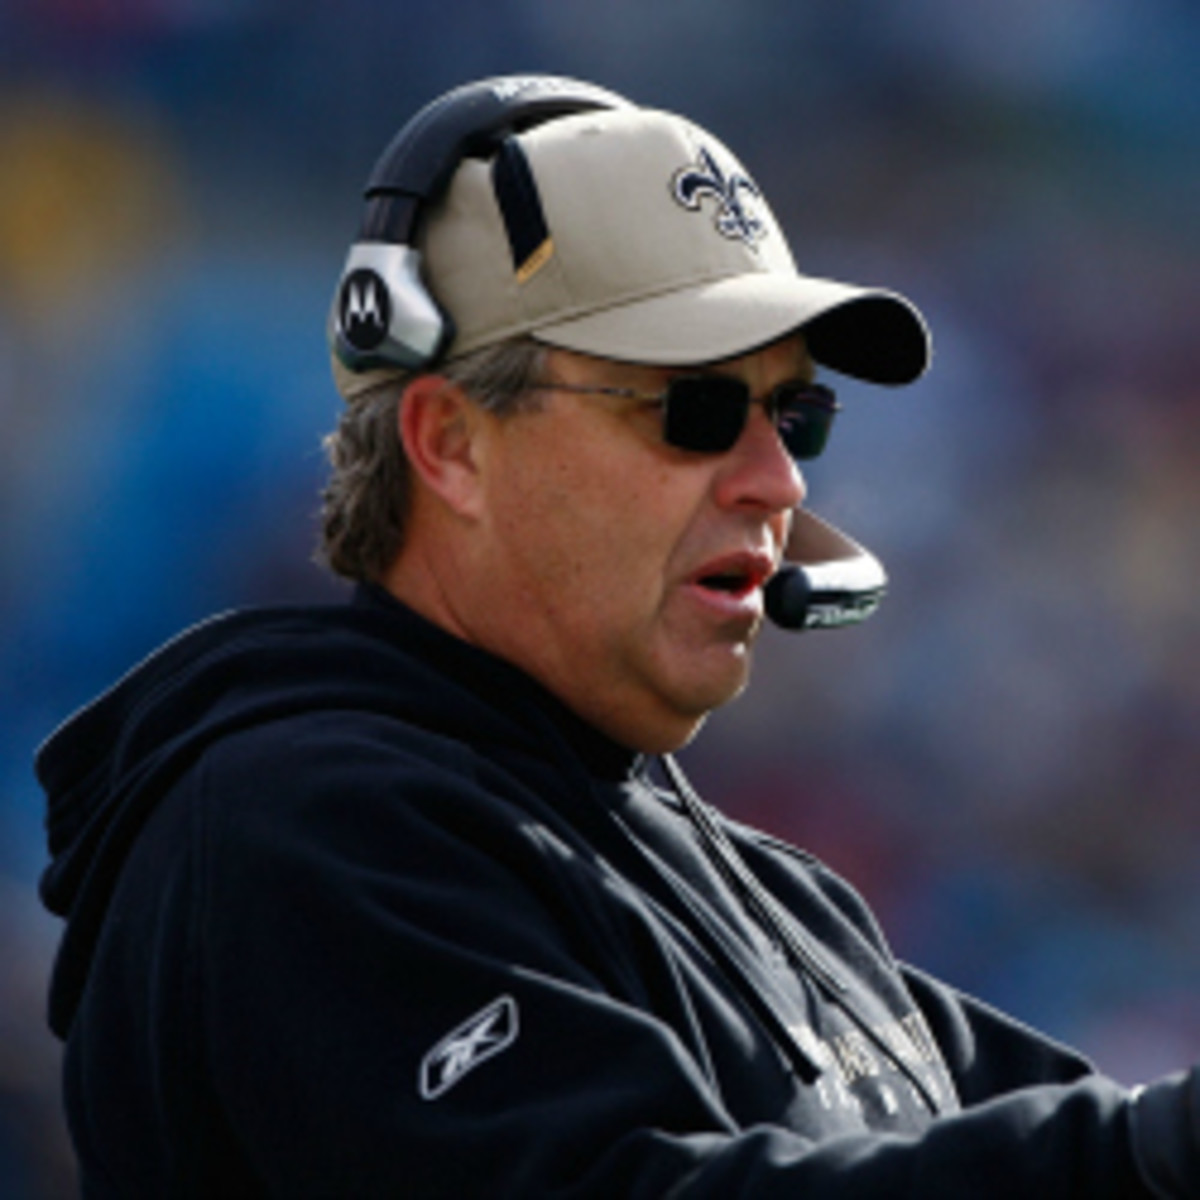 Gregg Williams has been reinstated and will join the Titans' coaching staff after being suspended for orchestrating the Saints' bounty program. (Scott Halleran/Getty Images)